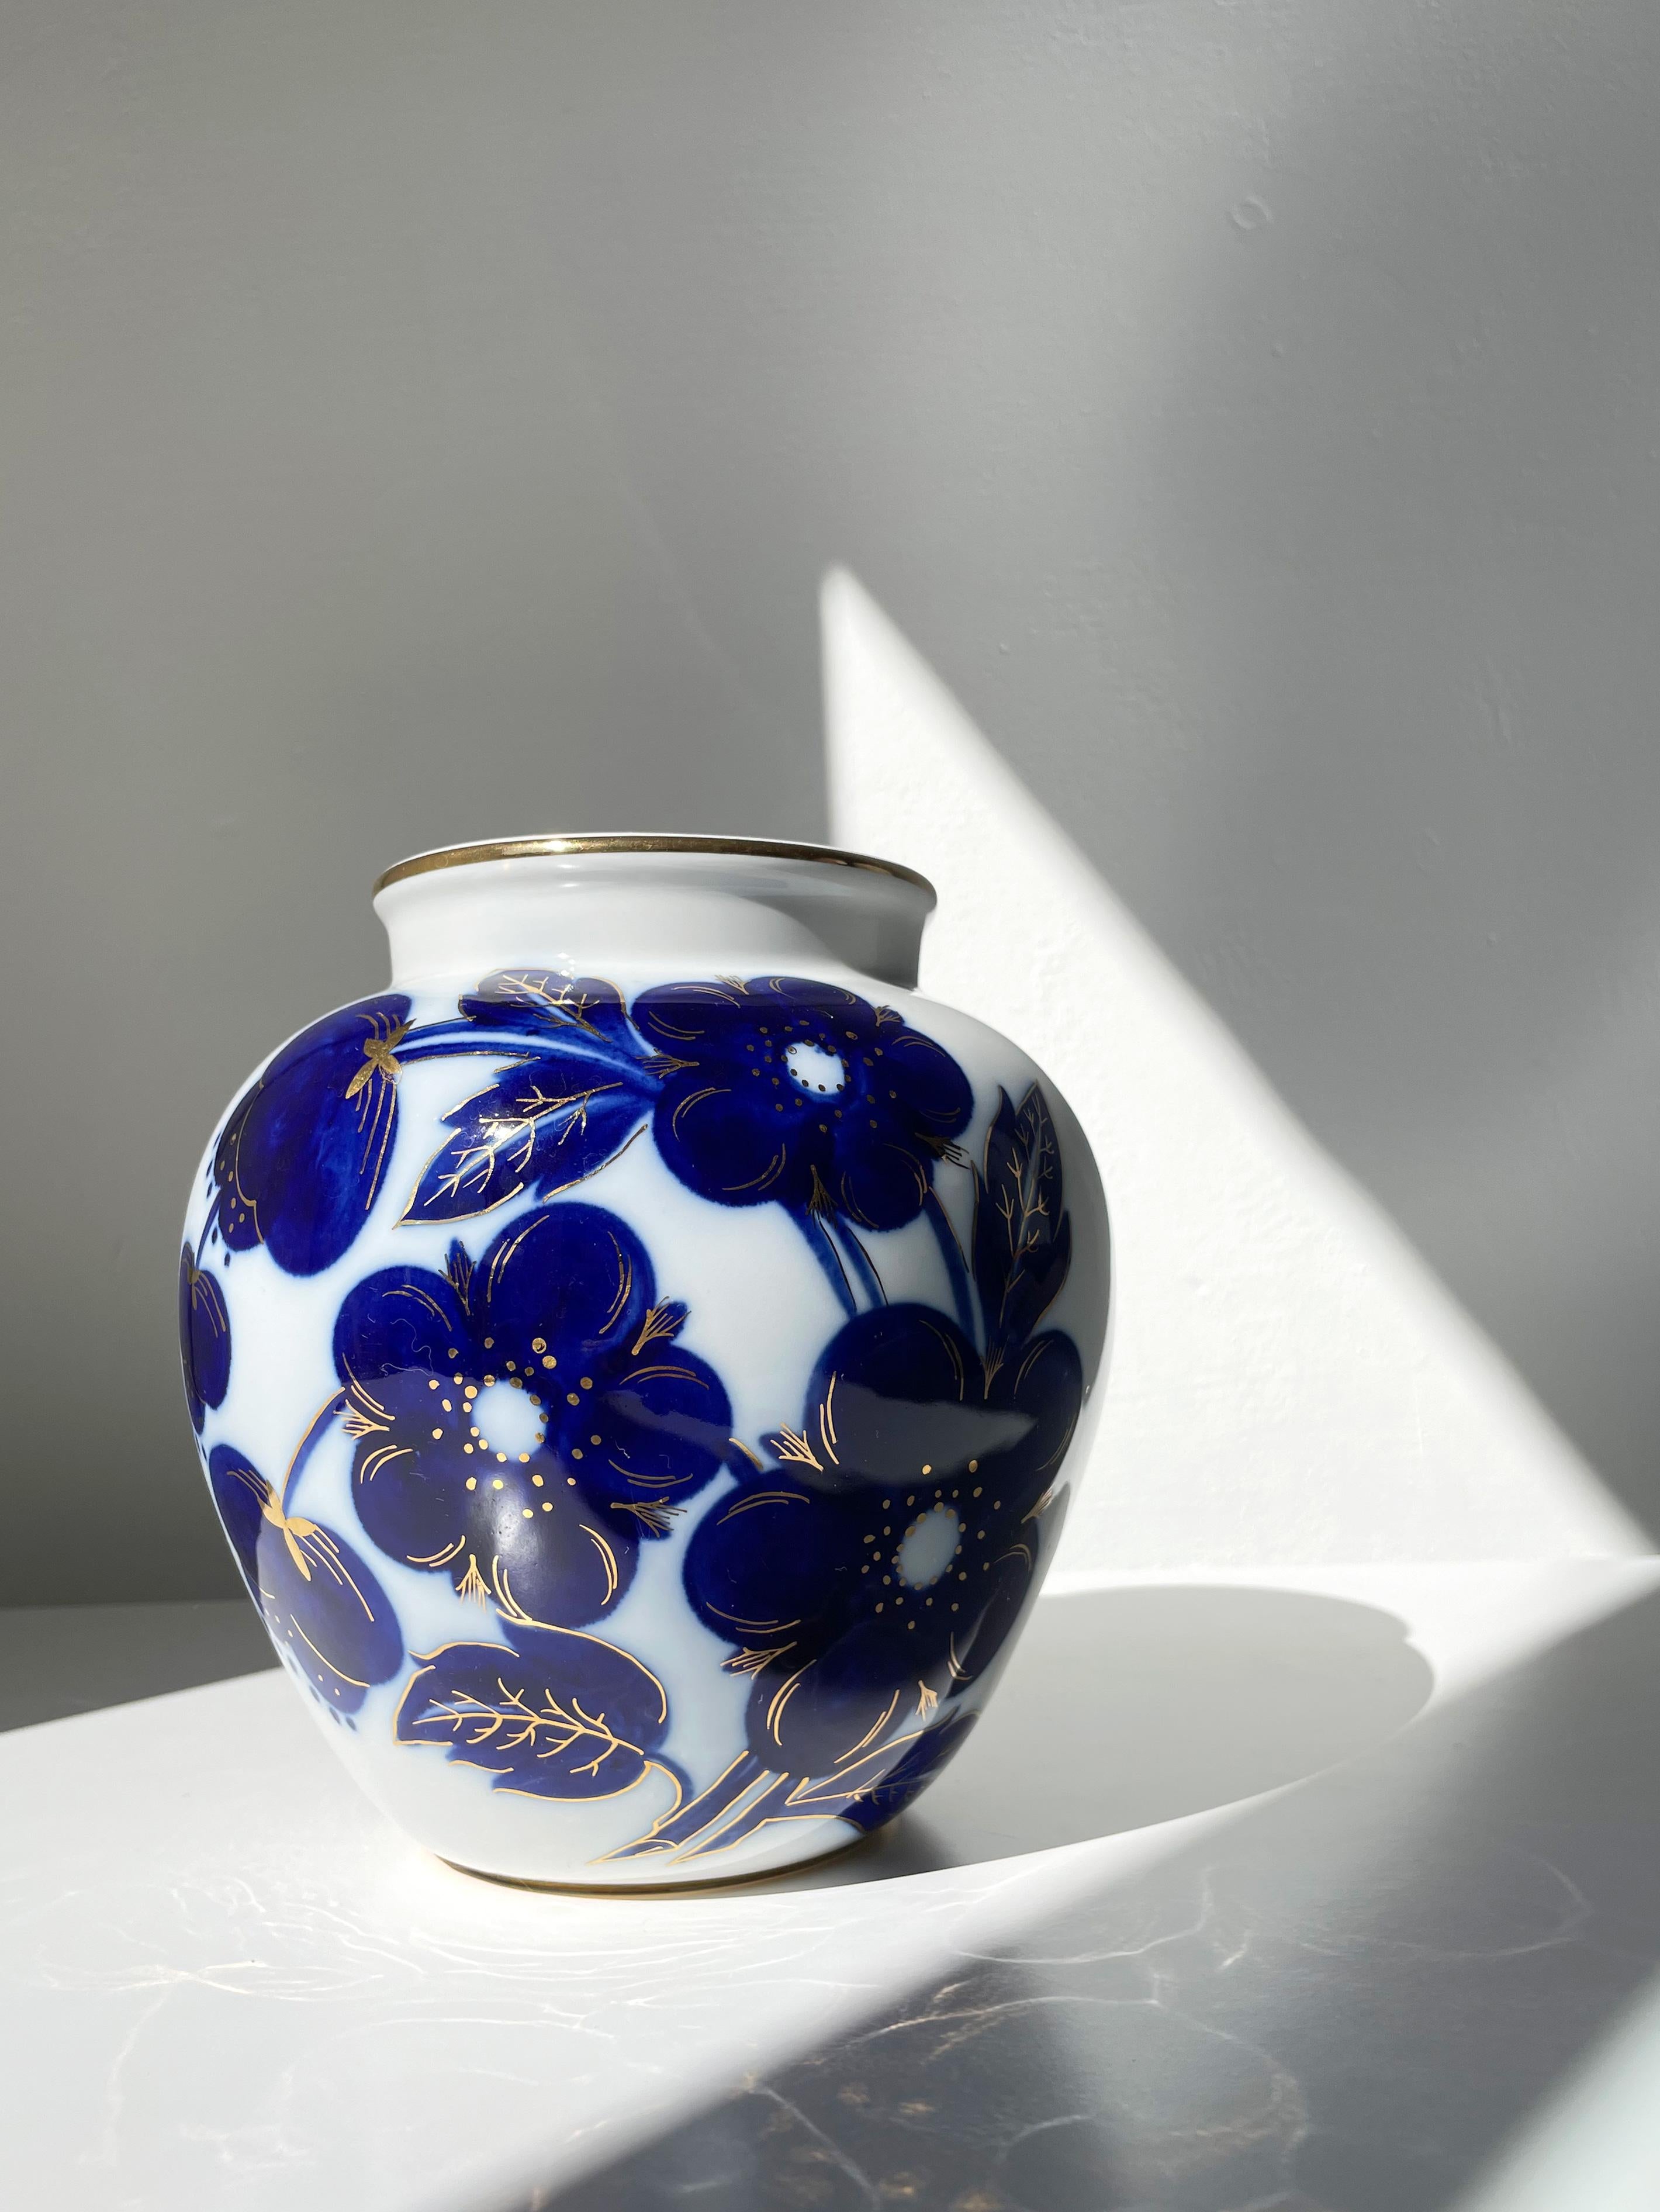 Russian white porcelain vase manufactured in the 1950s by the Lomonosov Porcelain Factory (founded in 1744). Soft shaped organic Mid-Century Modern vase decorated by hand with large mineral cobalt blue flowers, stems, leaves and 22K gold accents.